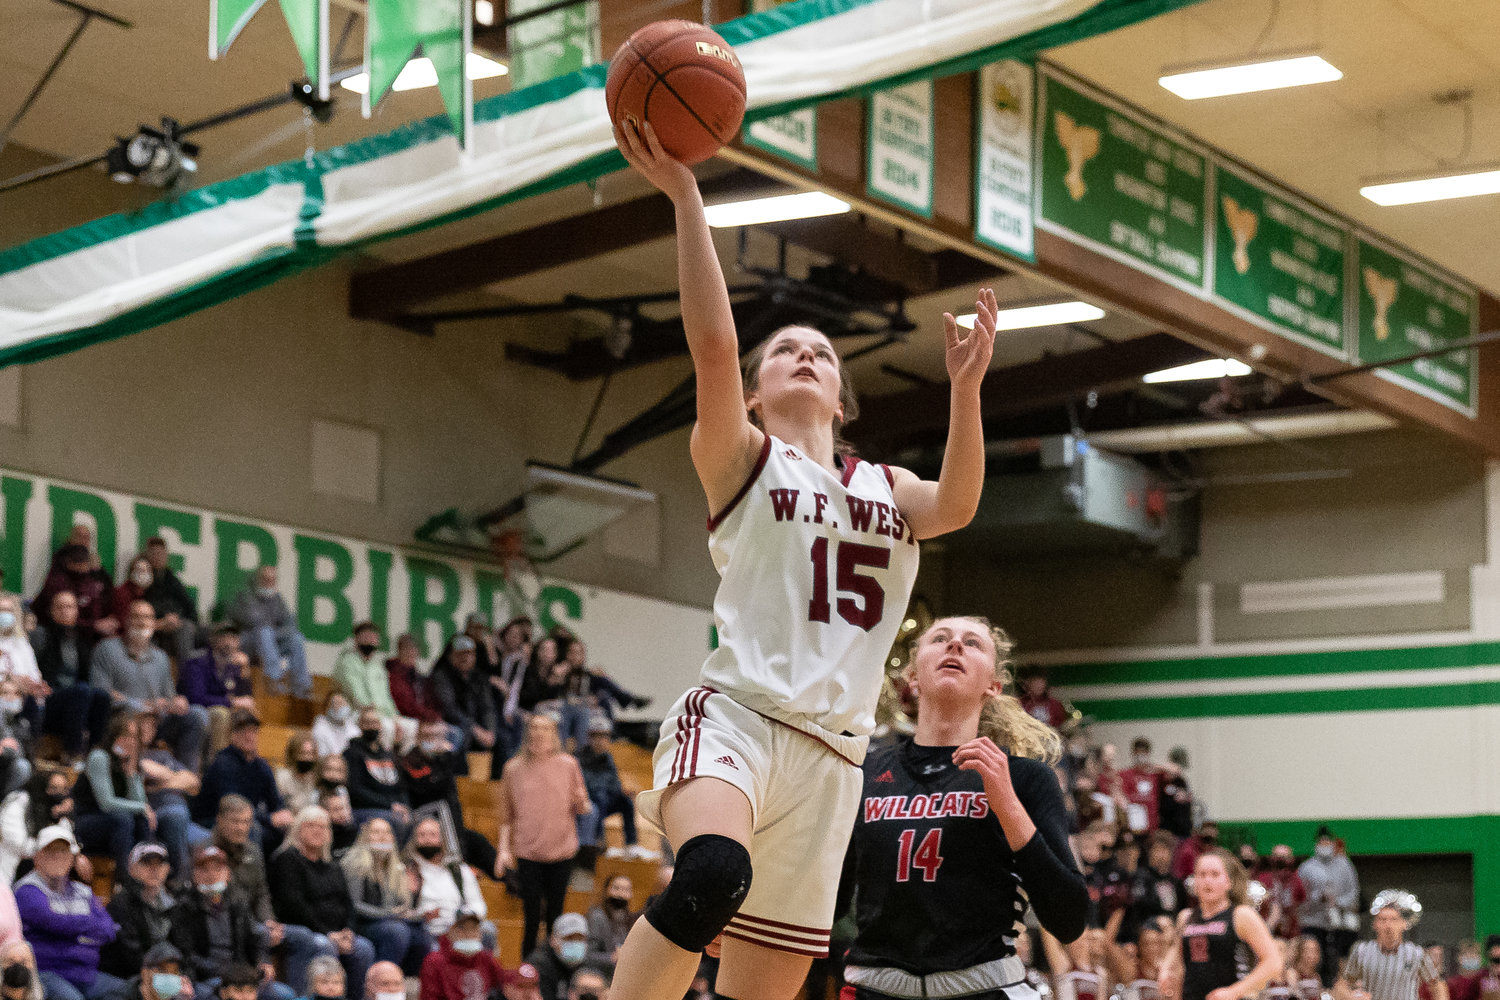 W.F. West guard Amanda Bennett drives for a layup against Archbishop Murphy in the regional round of the state tournament at Tumwater Feb. 25.